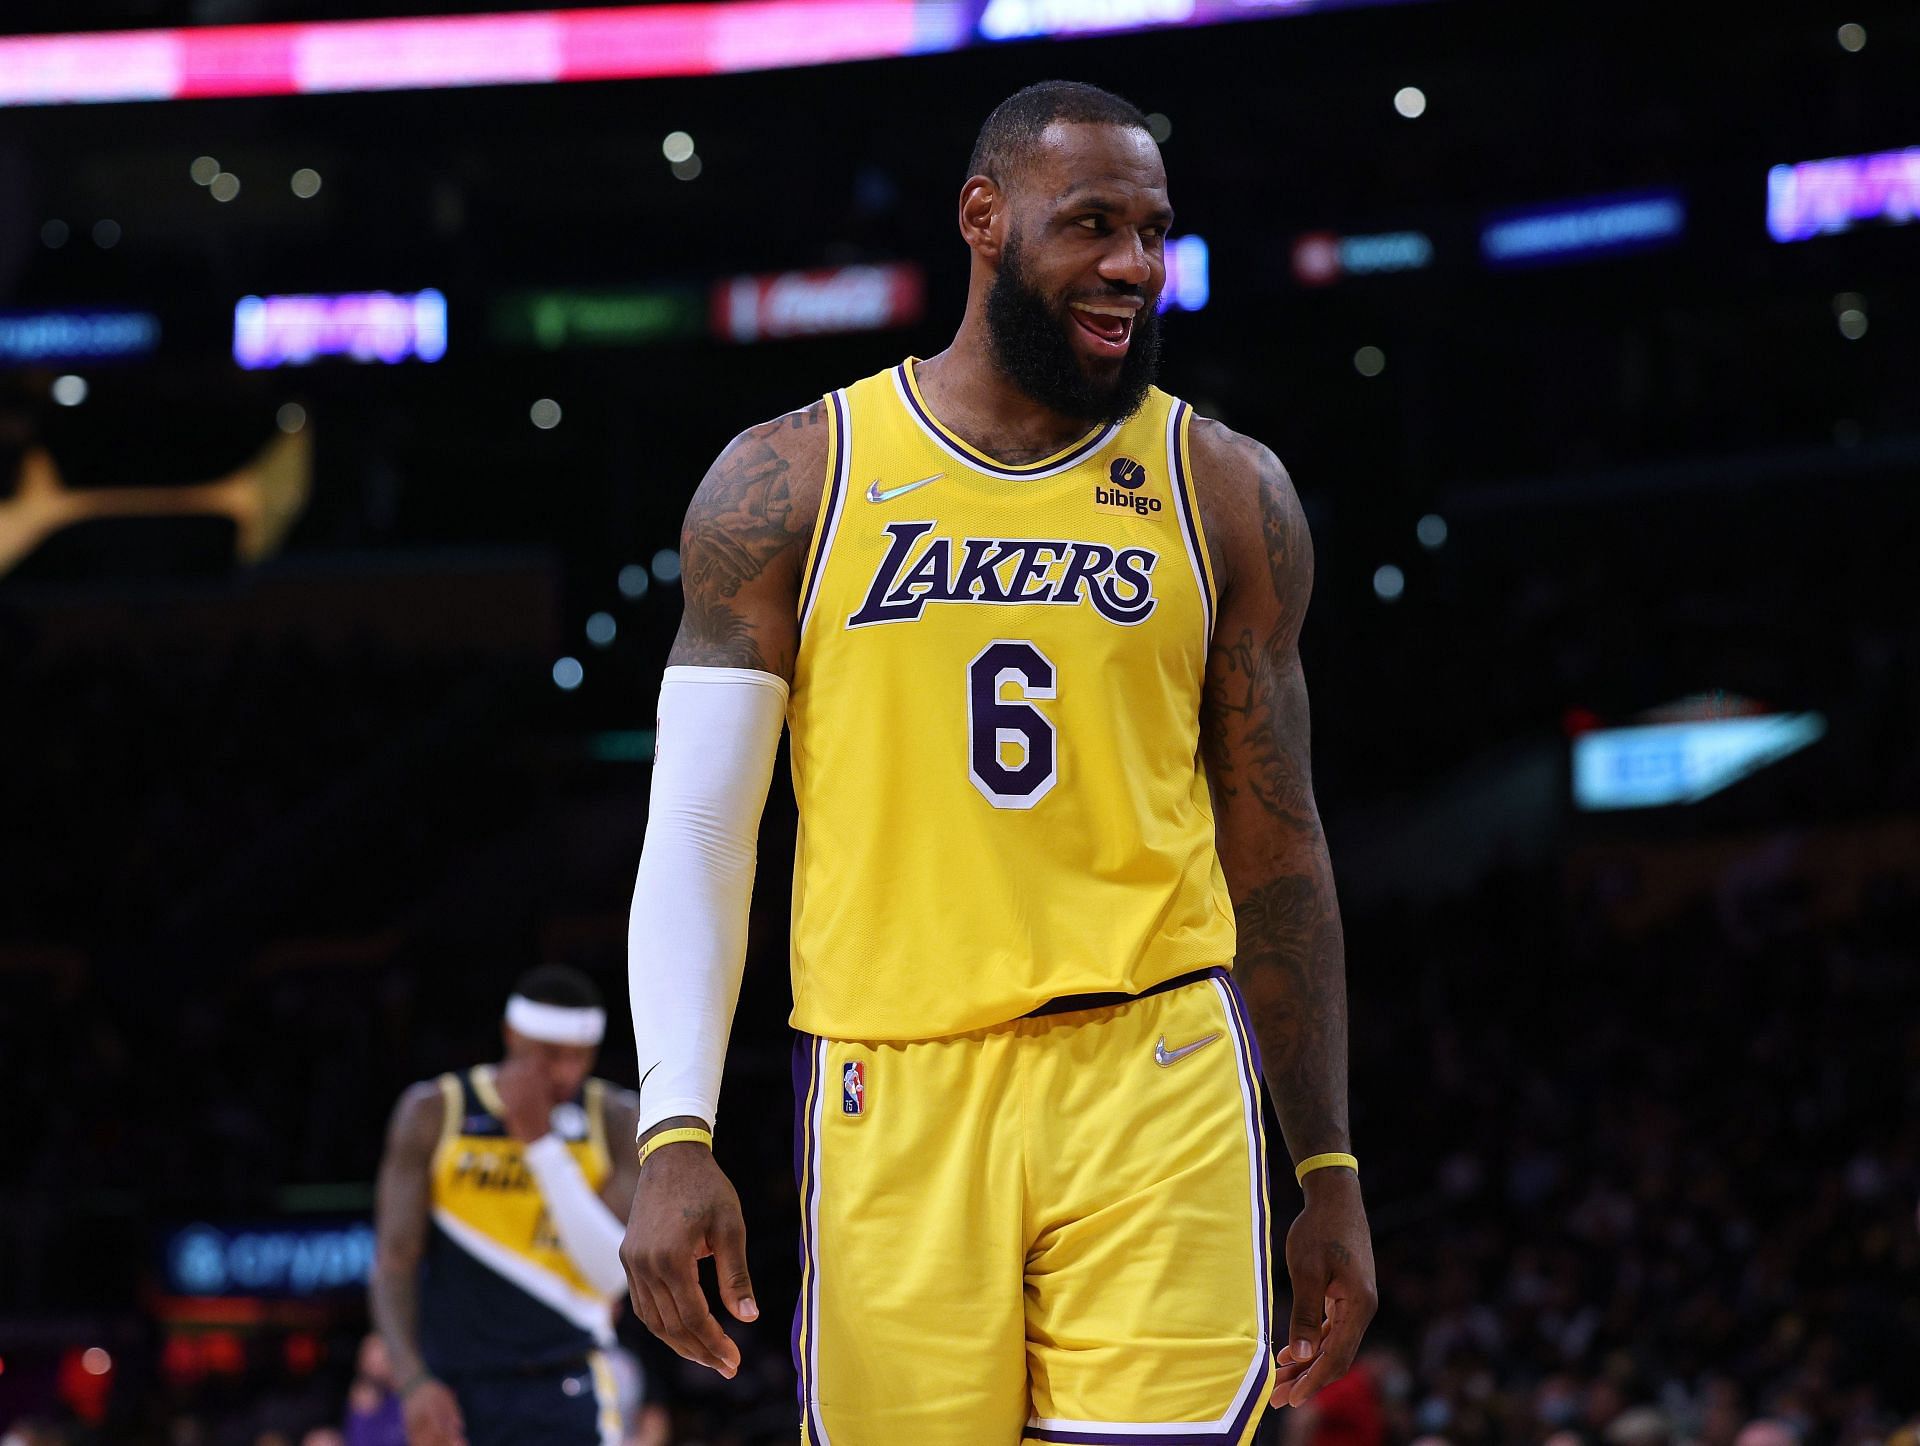 Orlando mayor invites Lebron James back to city after player says